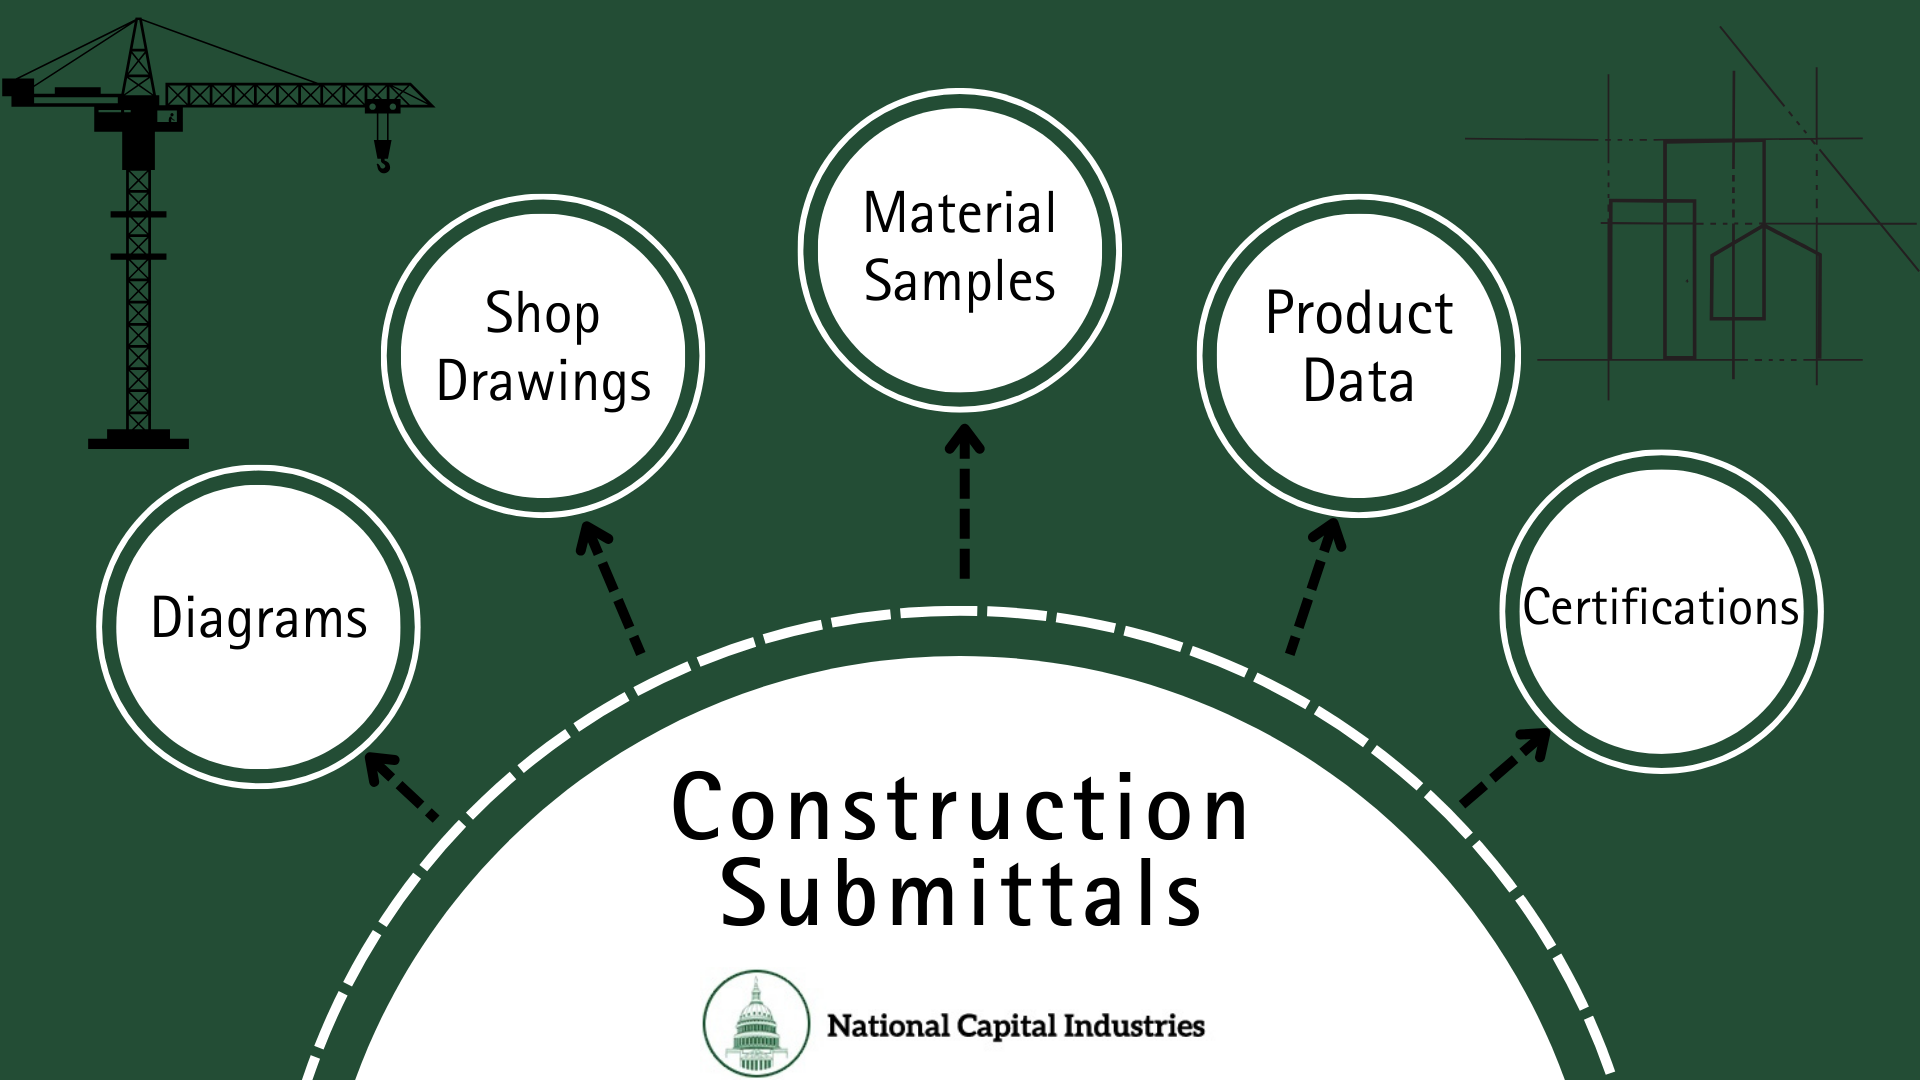 Infographic for NatCap about the elements of a submittal